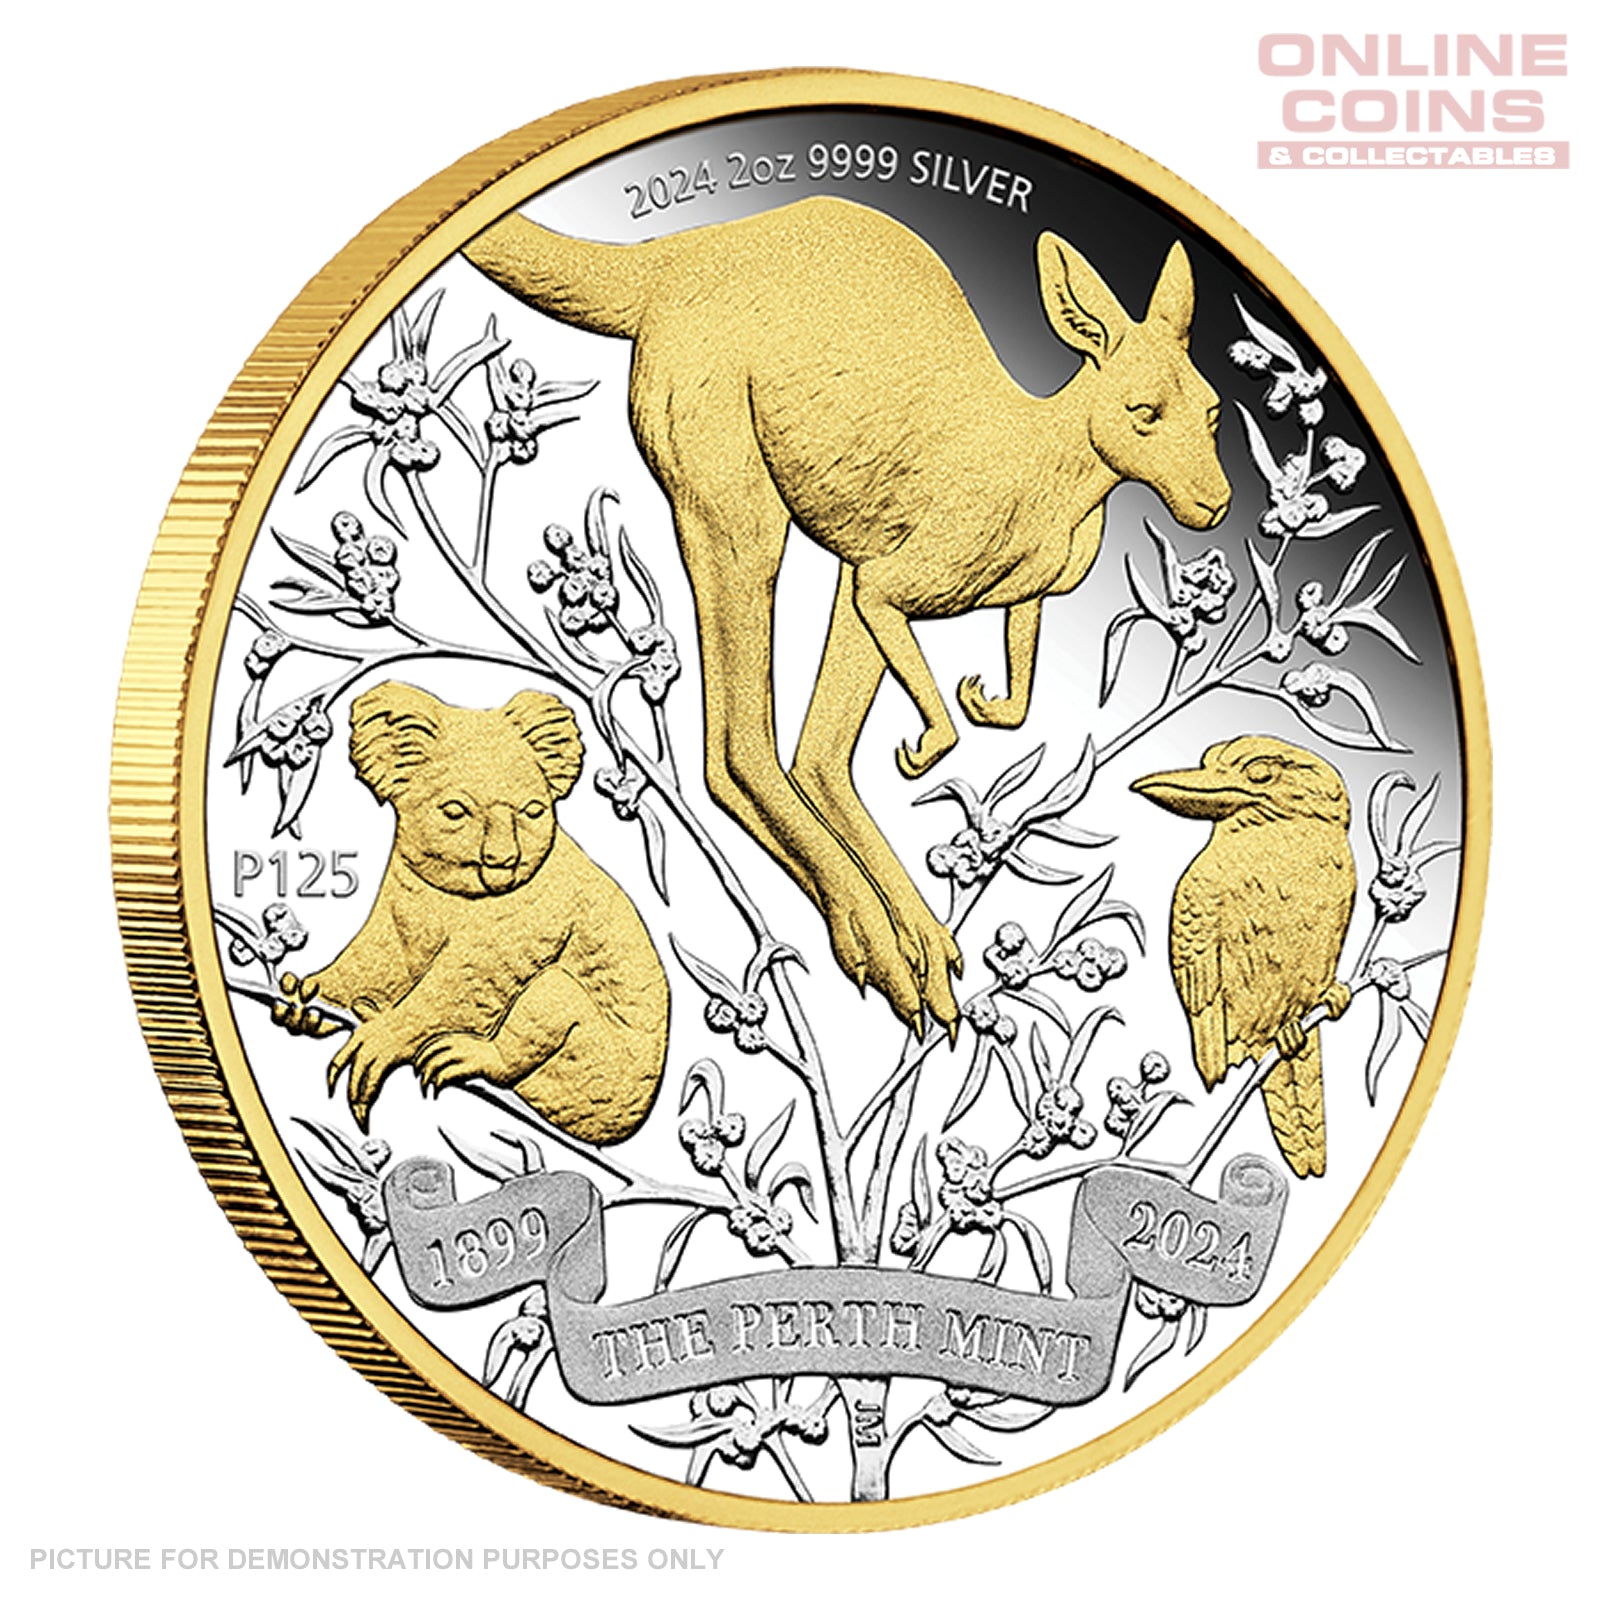 2024 Perth Mint 2oz Silver Proof Gilded Coin - Perth Mint 125th Anniversary